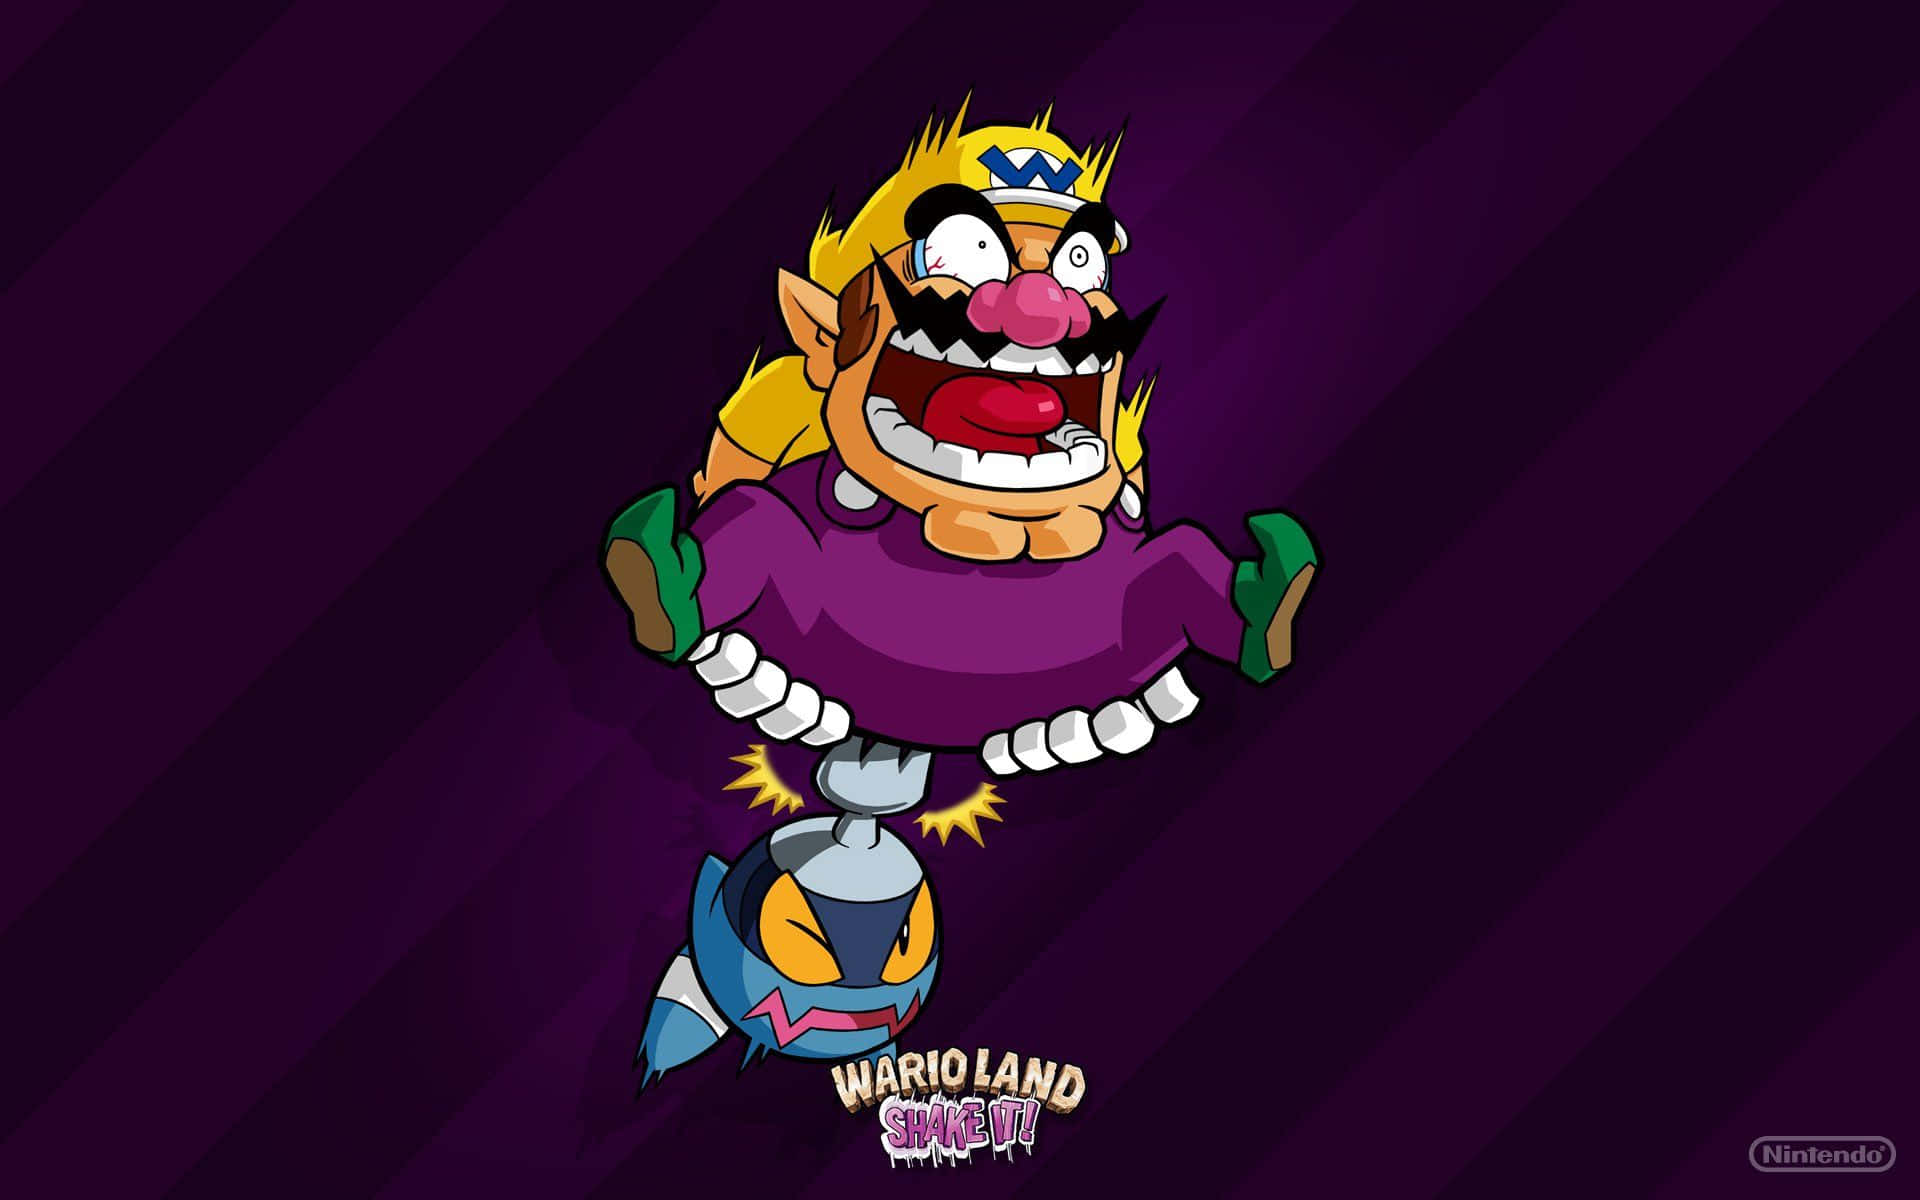 Wario, The Mischievous Antagonist, Taking Center Stage In This Vibrant Artwork Background